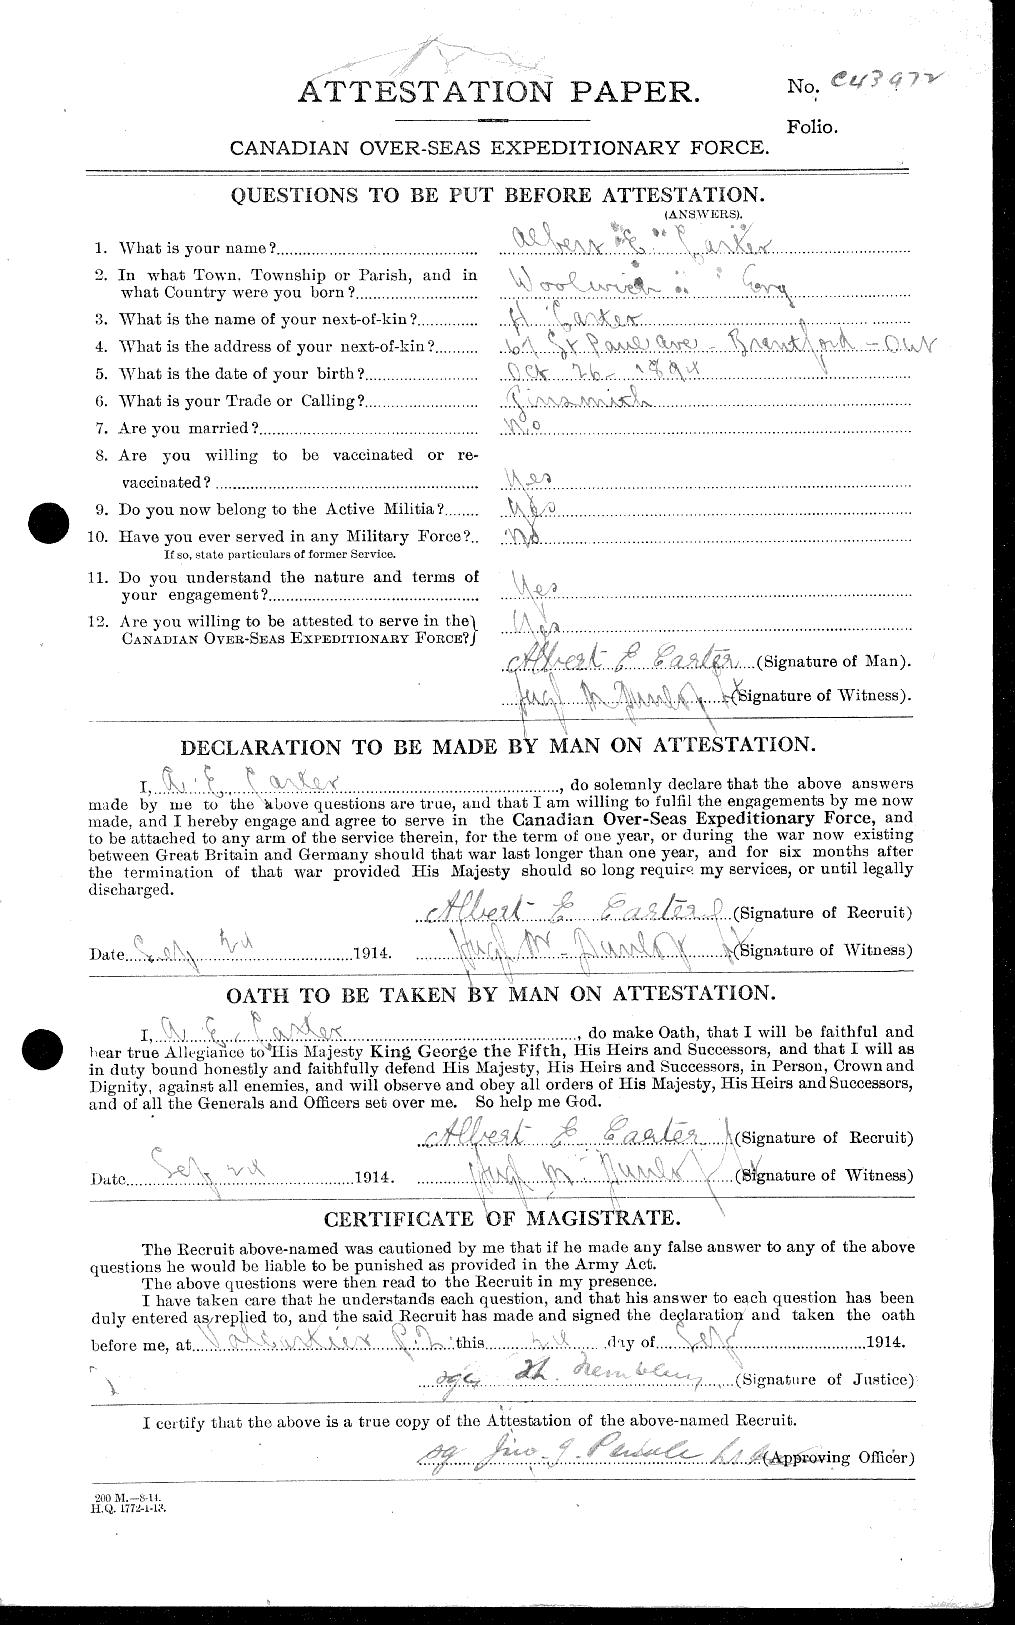 Personnel Records of the First World War - CEF 010900a